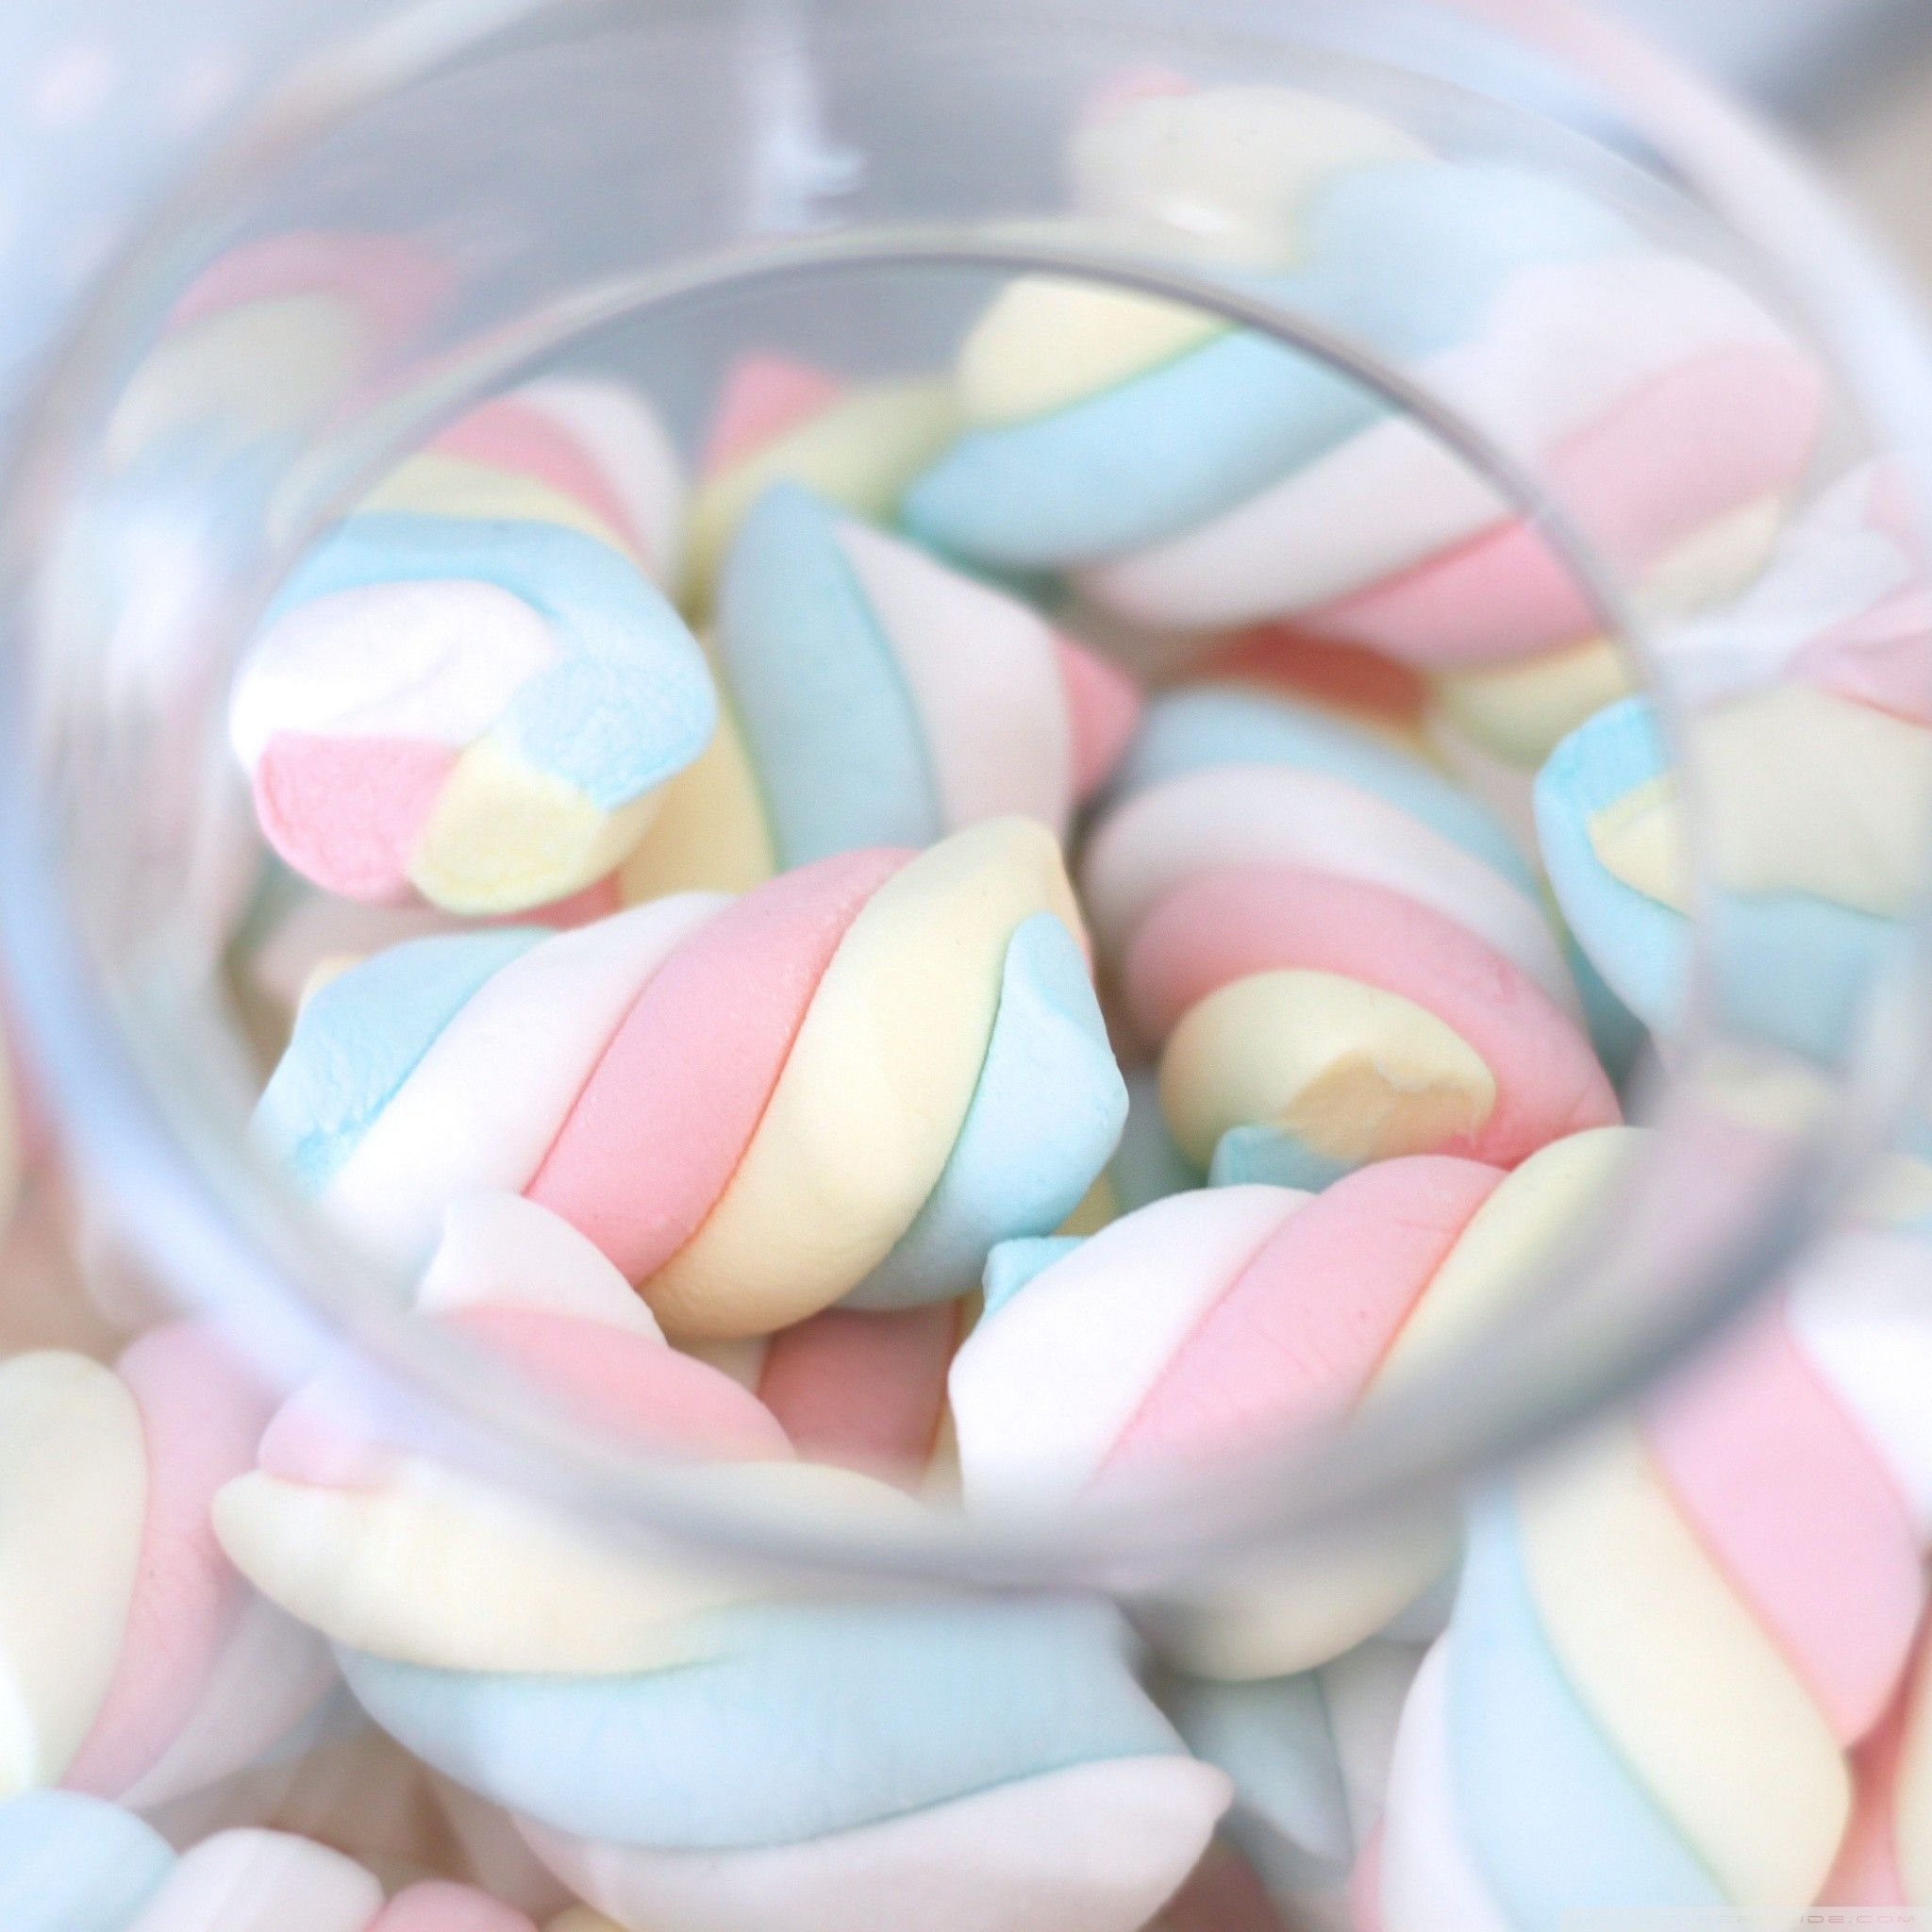 A glass jar filled with pastel colored marshmallows. - Marshmallows